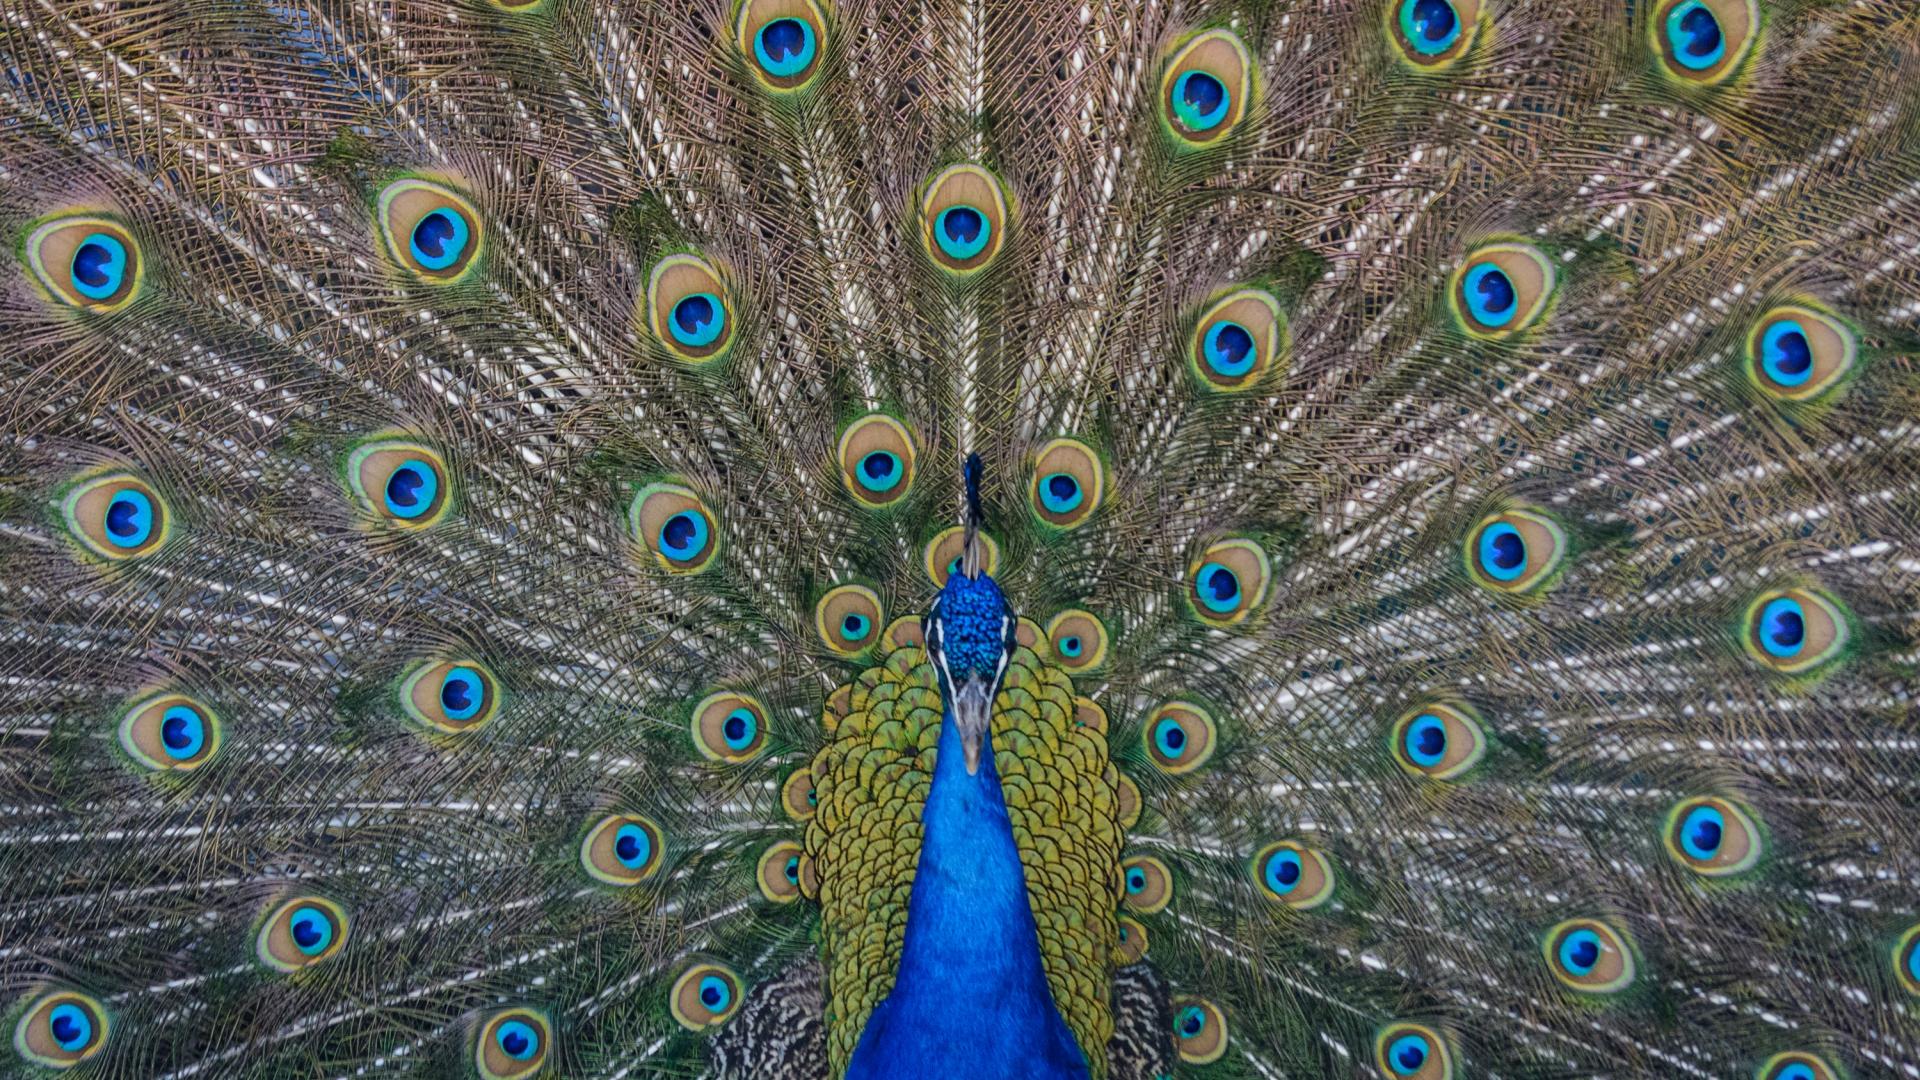 Male peacock displaying feathers